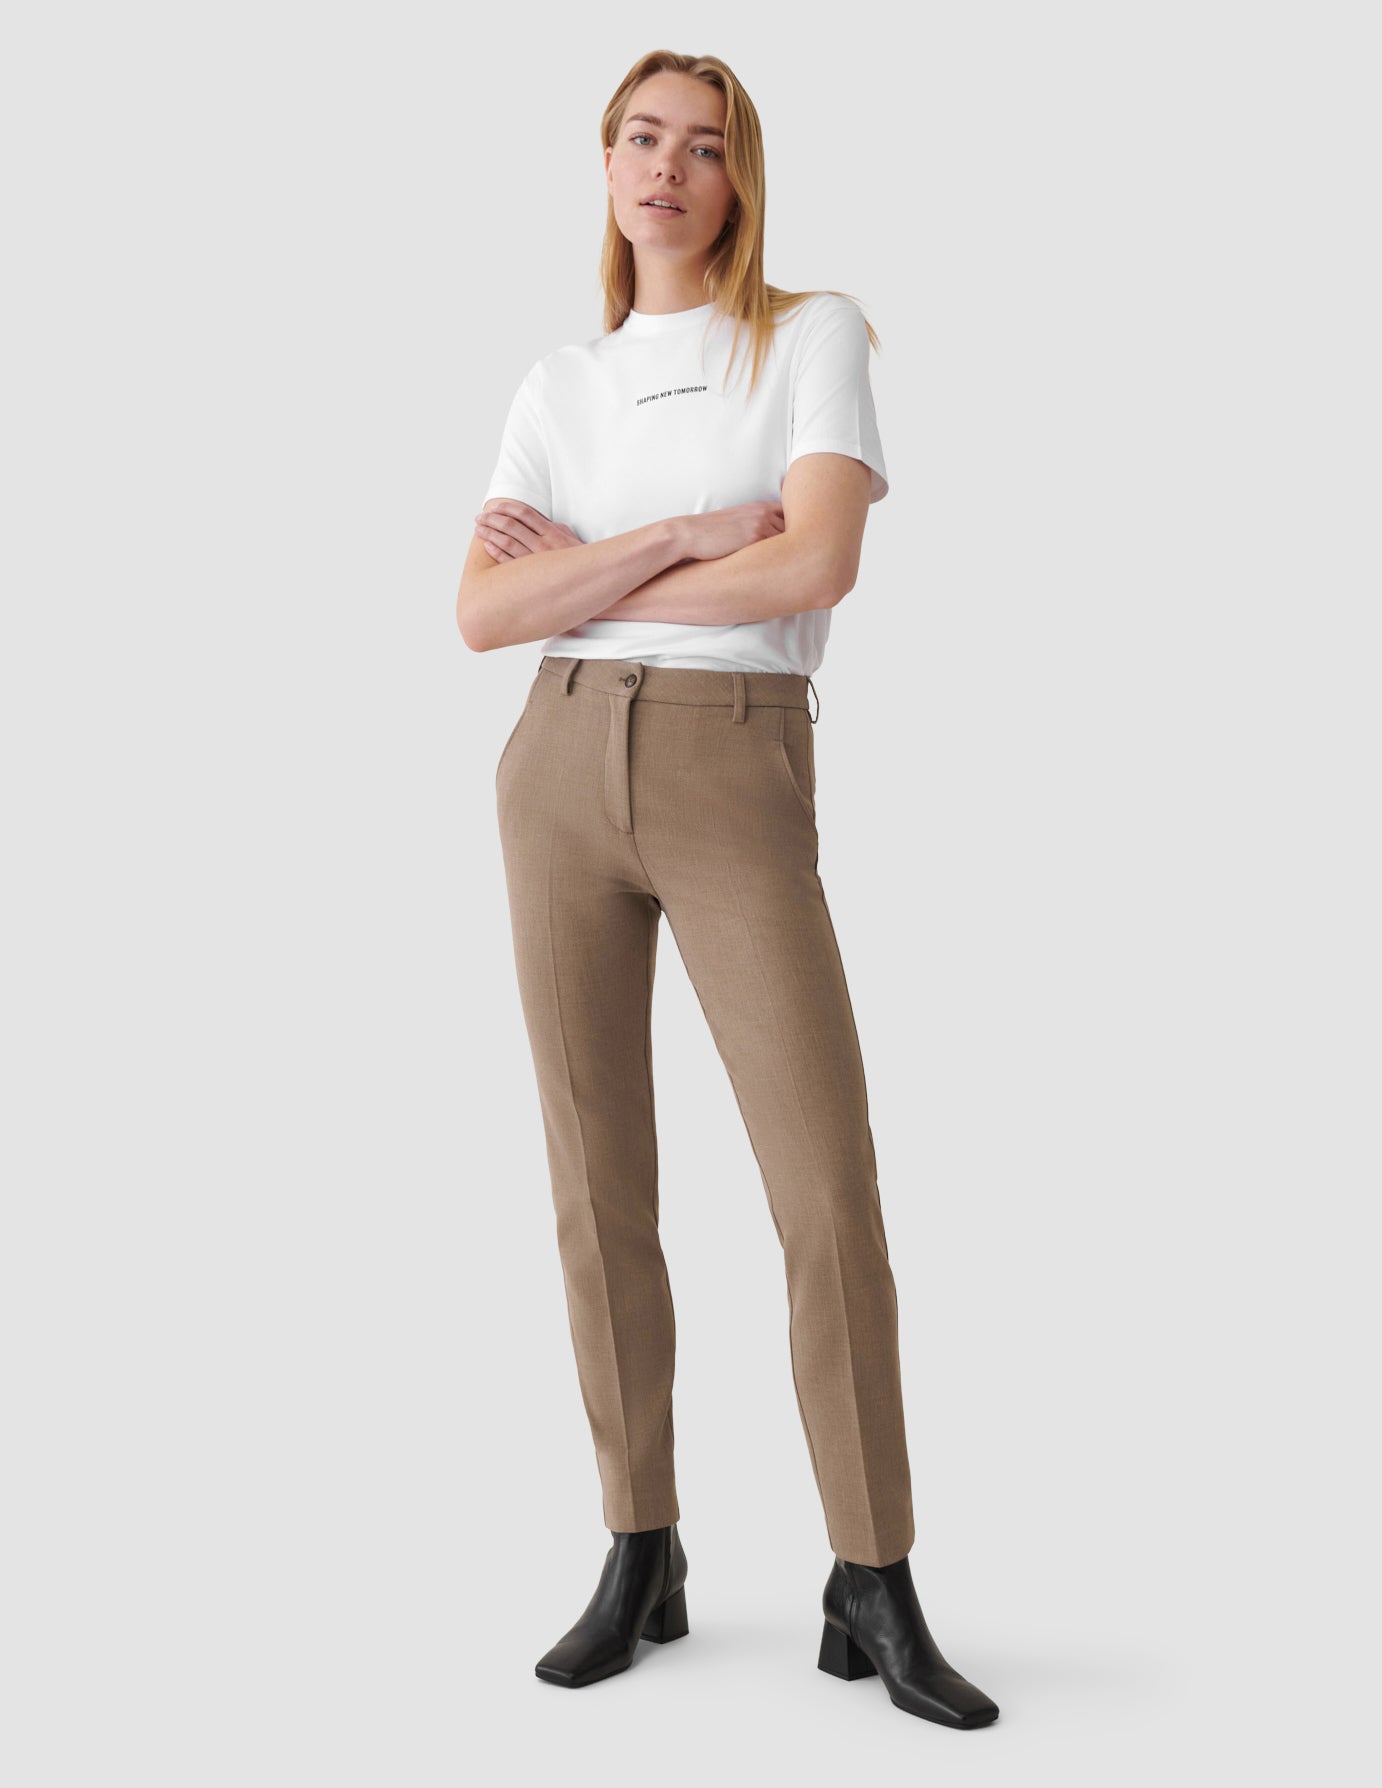 synet Jeg bærer tøj Labe Women No. 1 Pants Cappuccino | SHAPING NEW TOMORROW